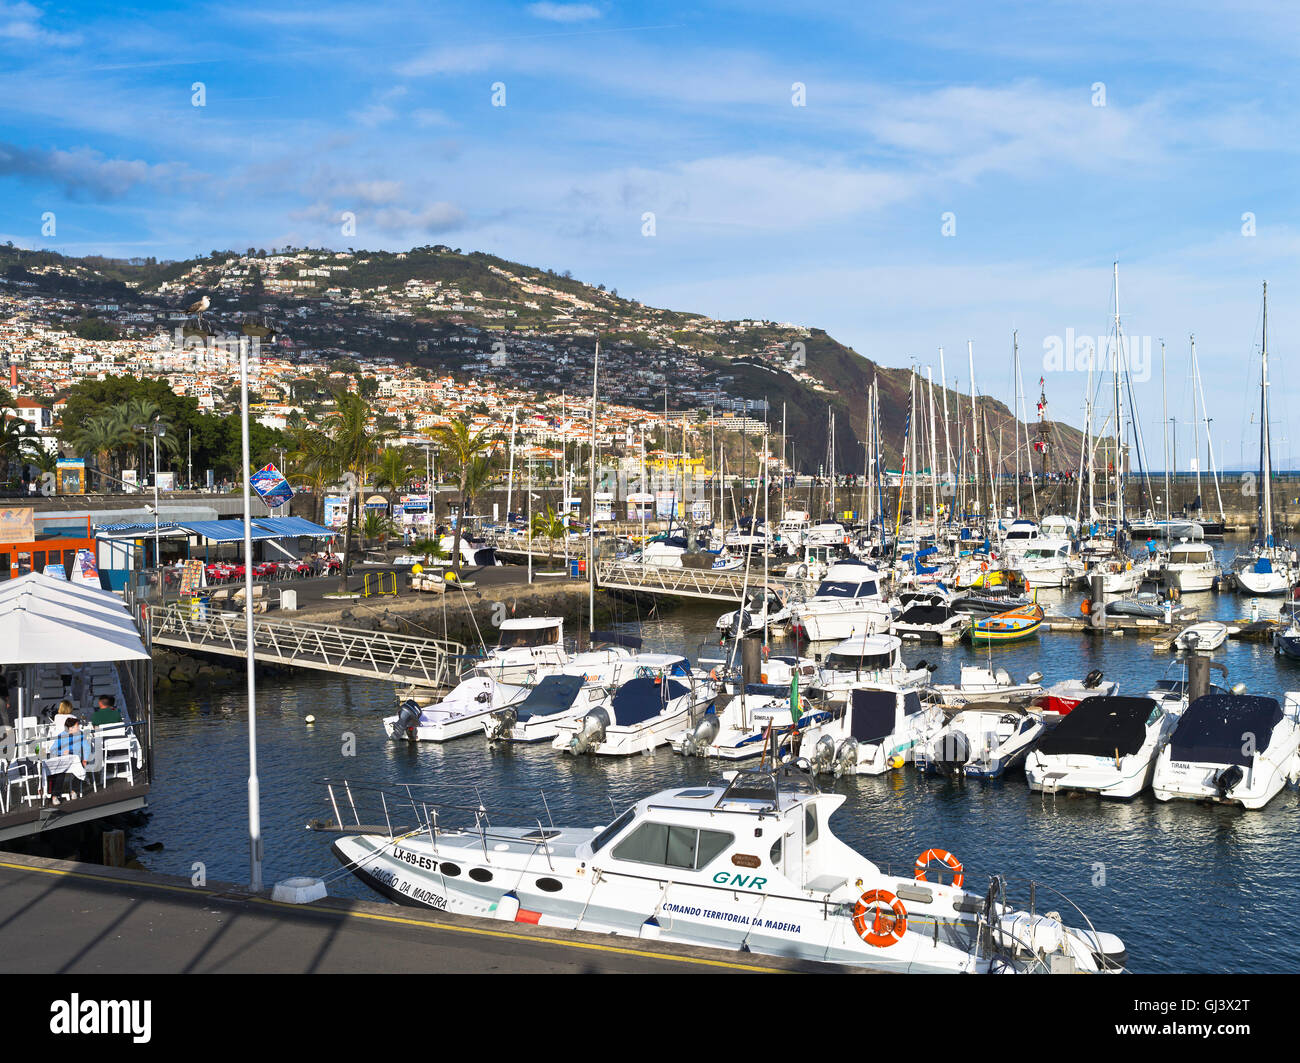 dh Funchal harbour FUNCHAL MADEIRA People cafe Funchal marina harbour yachts boats Stock Photo